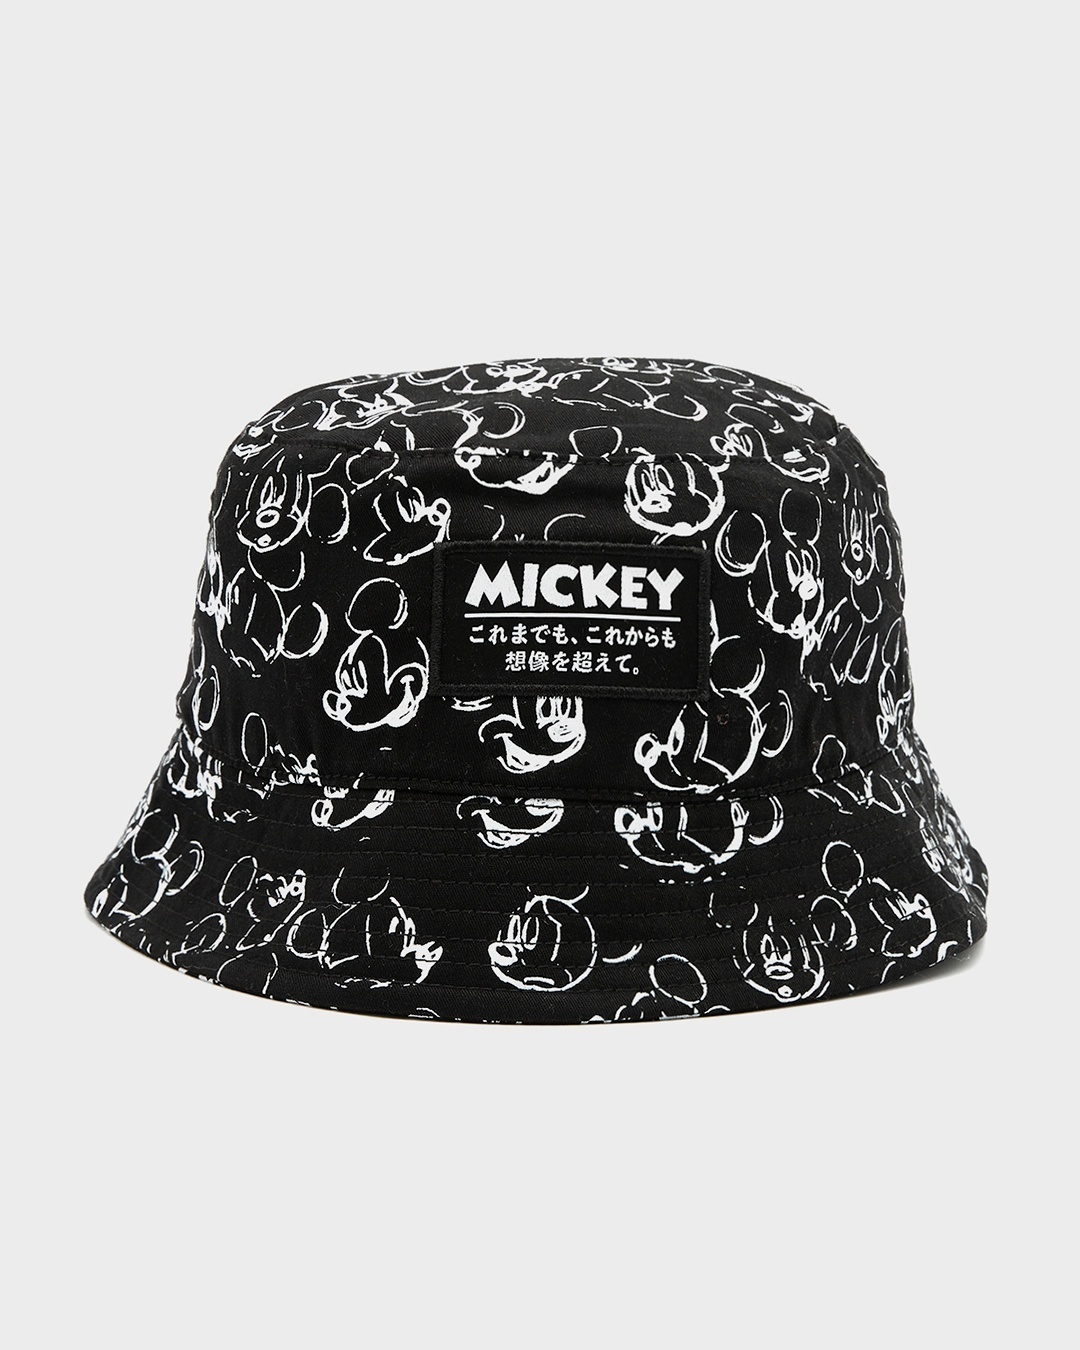 Unisex Black Mickey Doodle Printed Bucket Hat paired with resort shirts